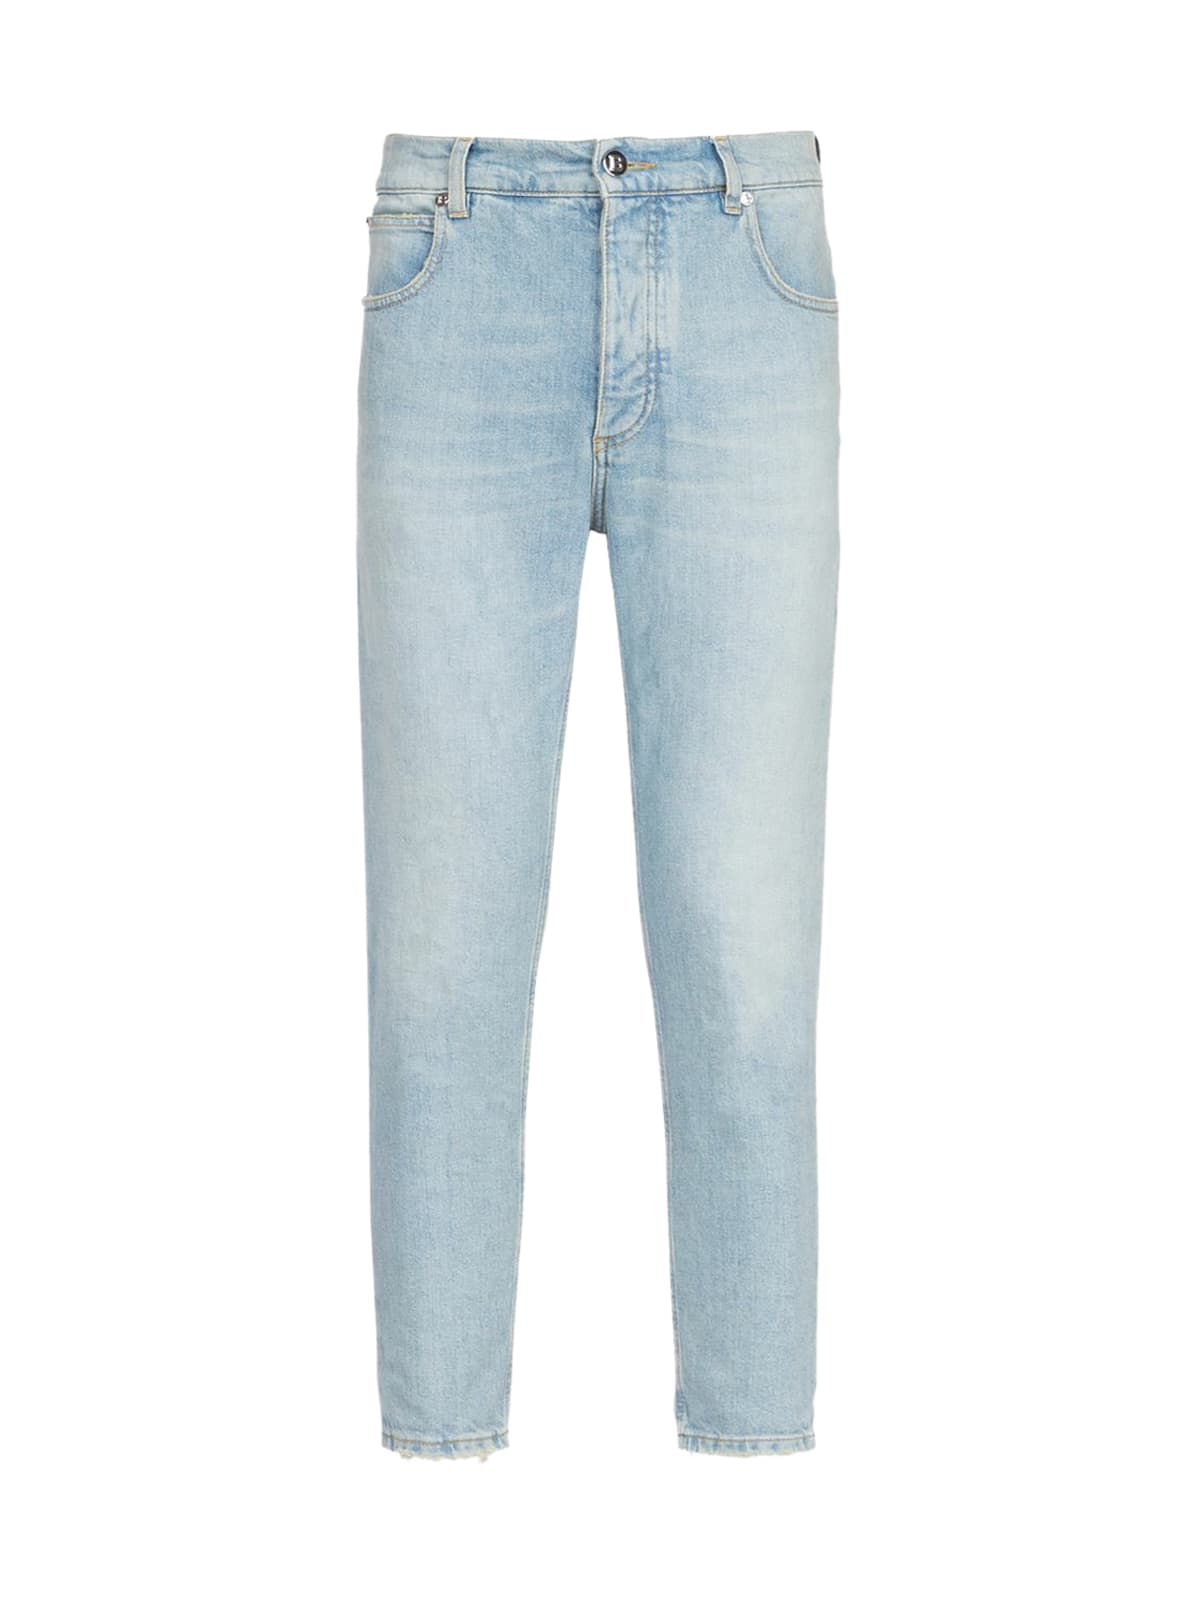 Balmain Cropped Tapered Embossed Jeans